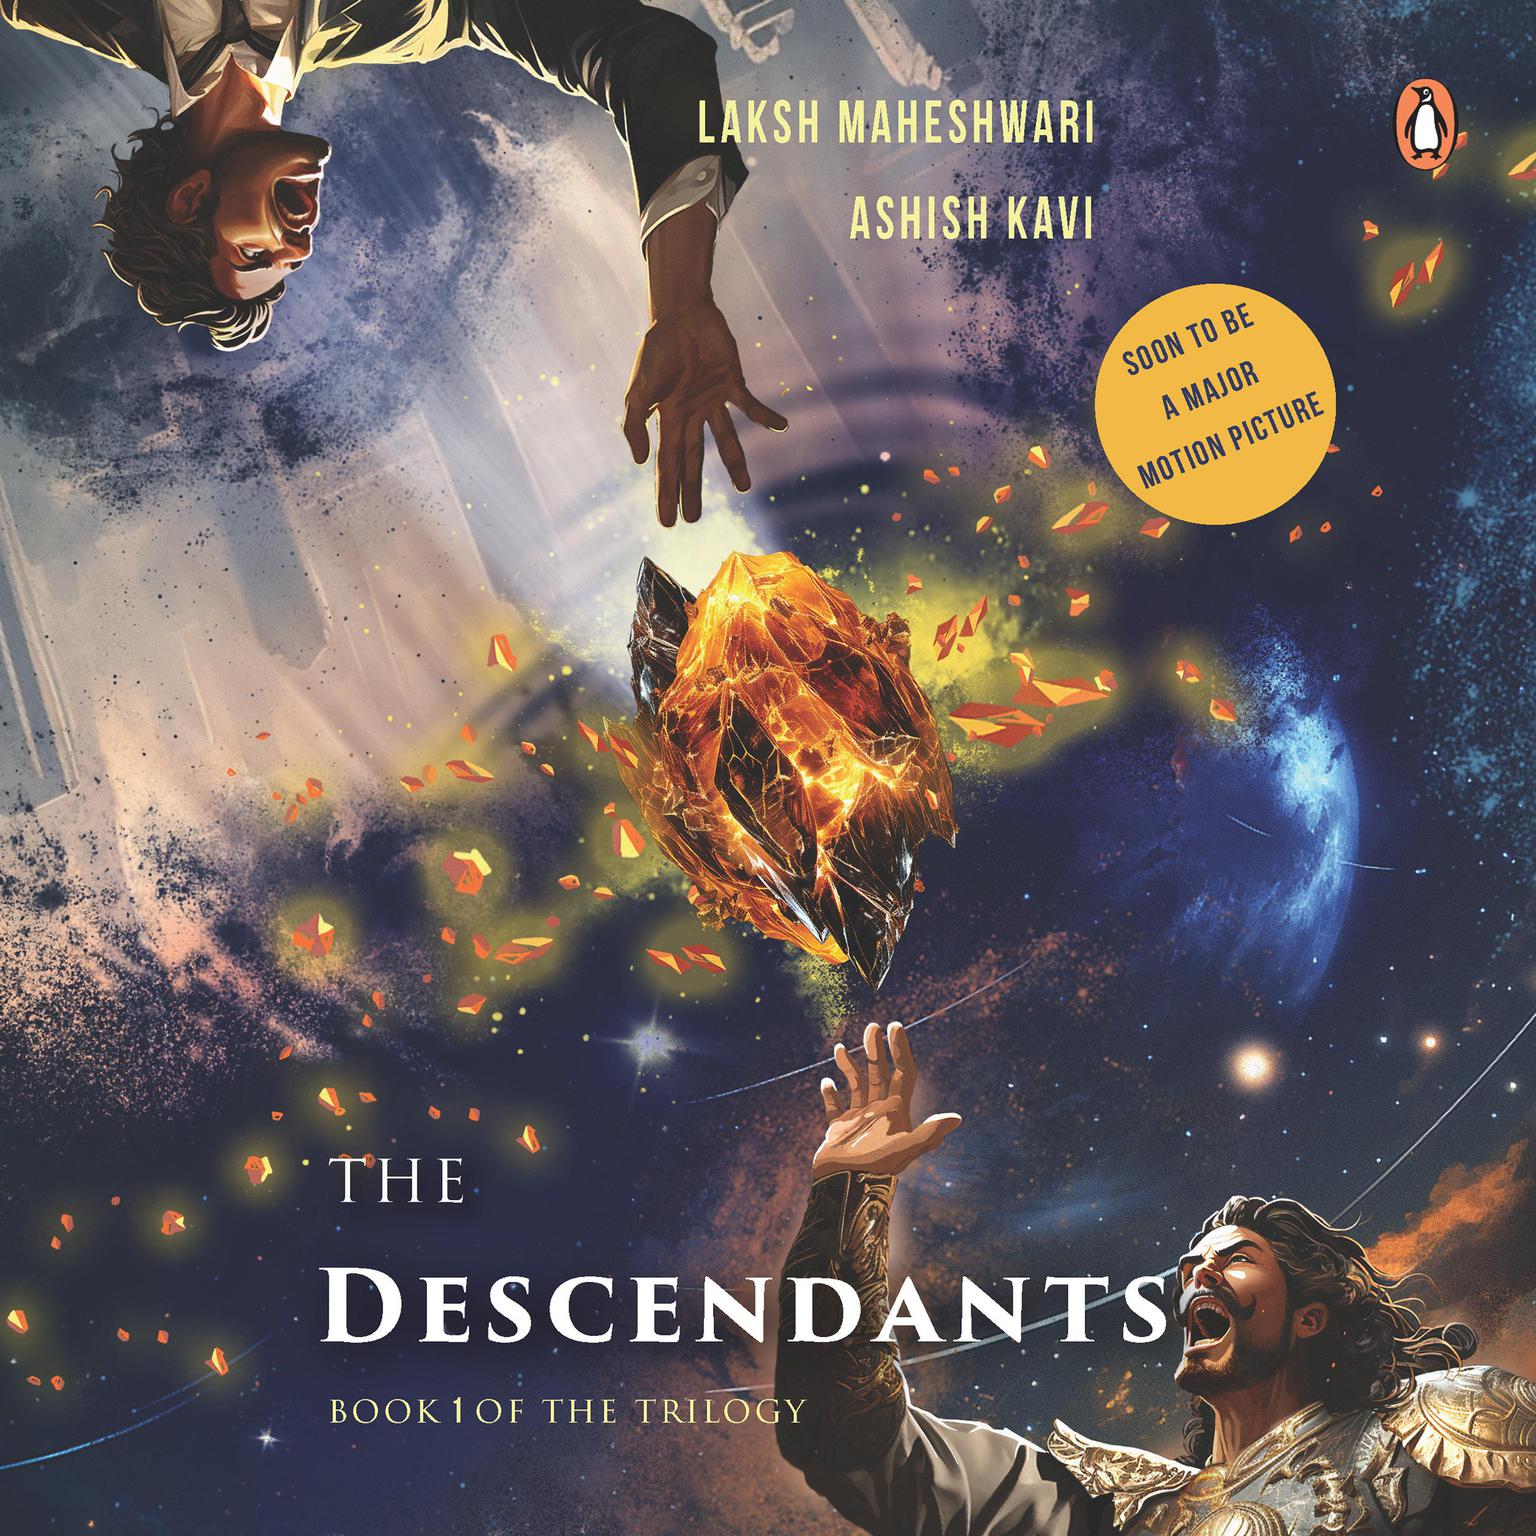 The Descendants: Book 1 of the Trilogy Audiobook, by Ashish Kavi